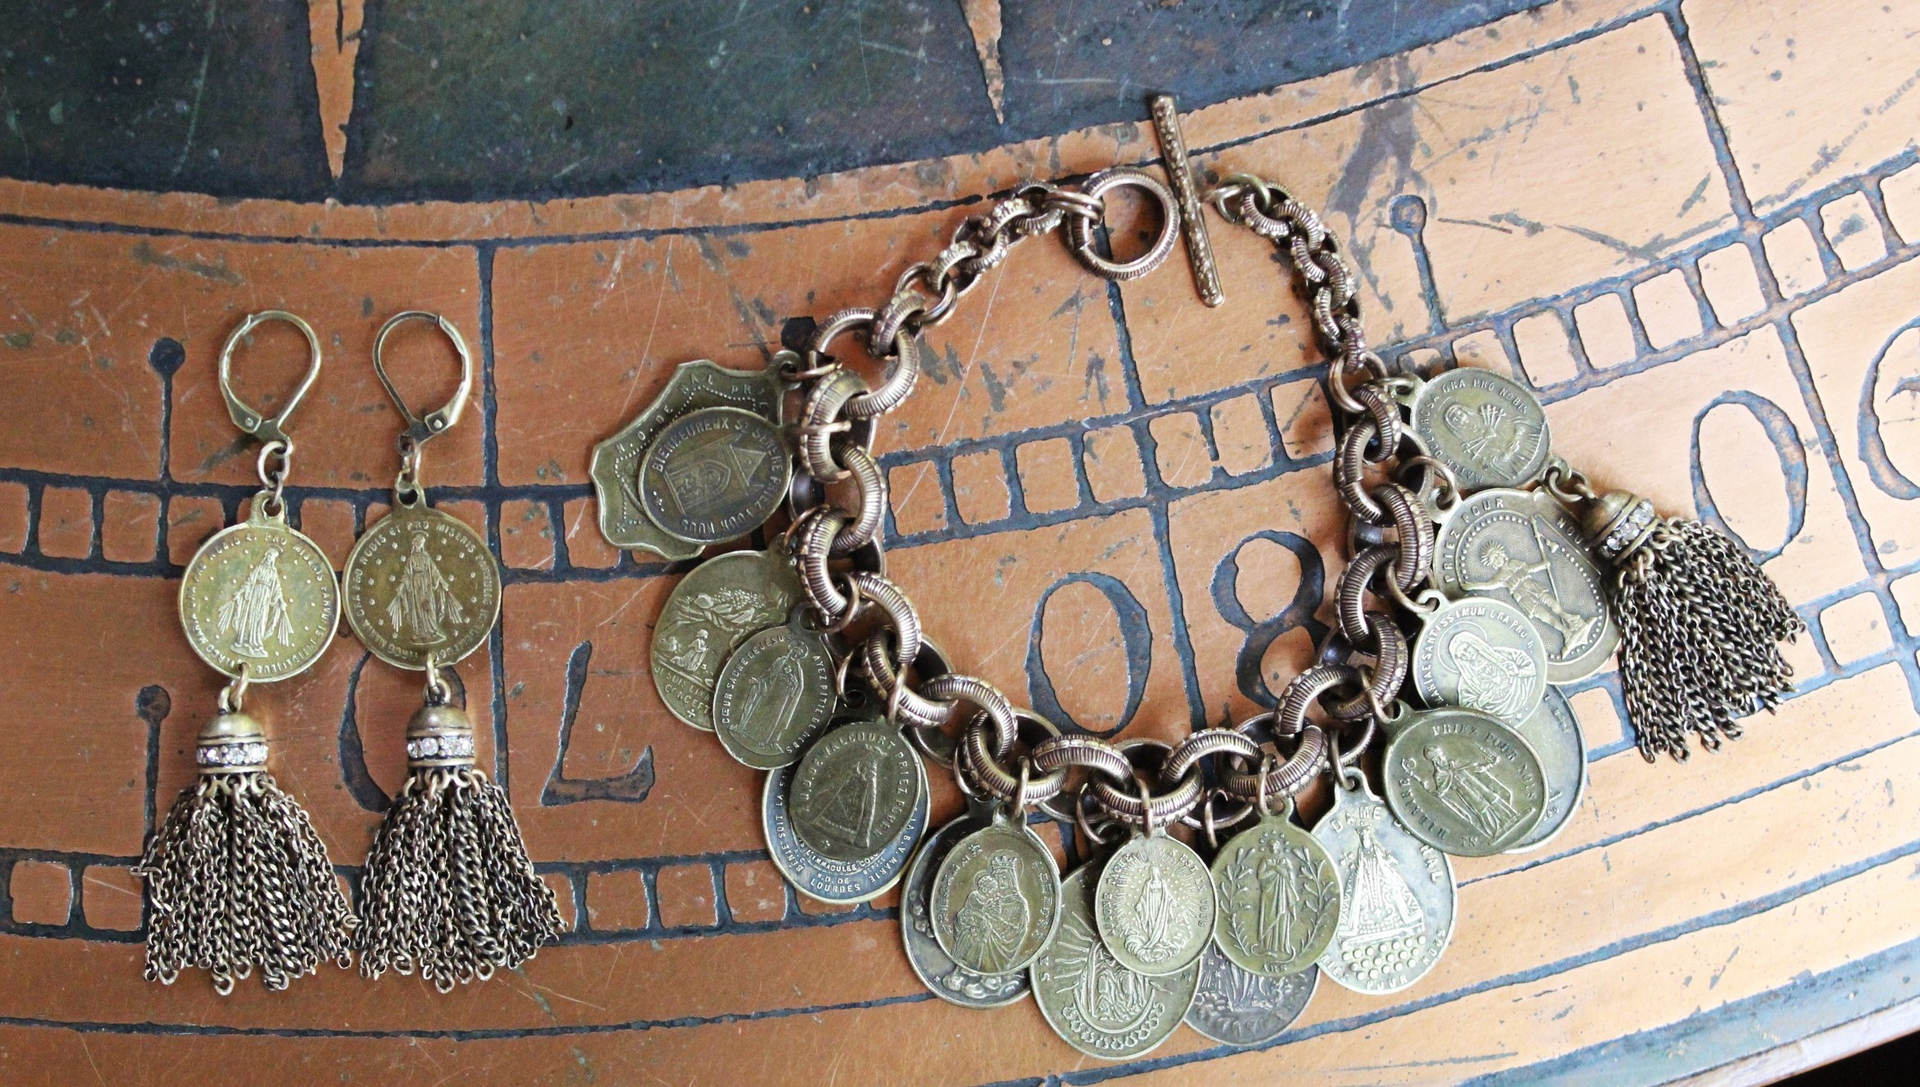 Solid Bronze Gold Antique French Medal Bracelet & Earring Set w/Multiple Antique French Medals, Vintage Chain Tassels & Bronze Earring Wires